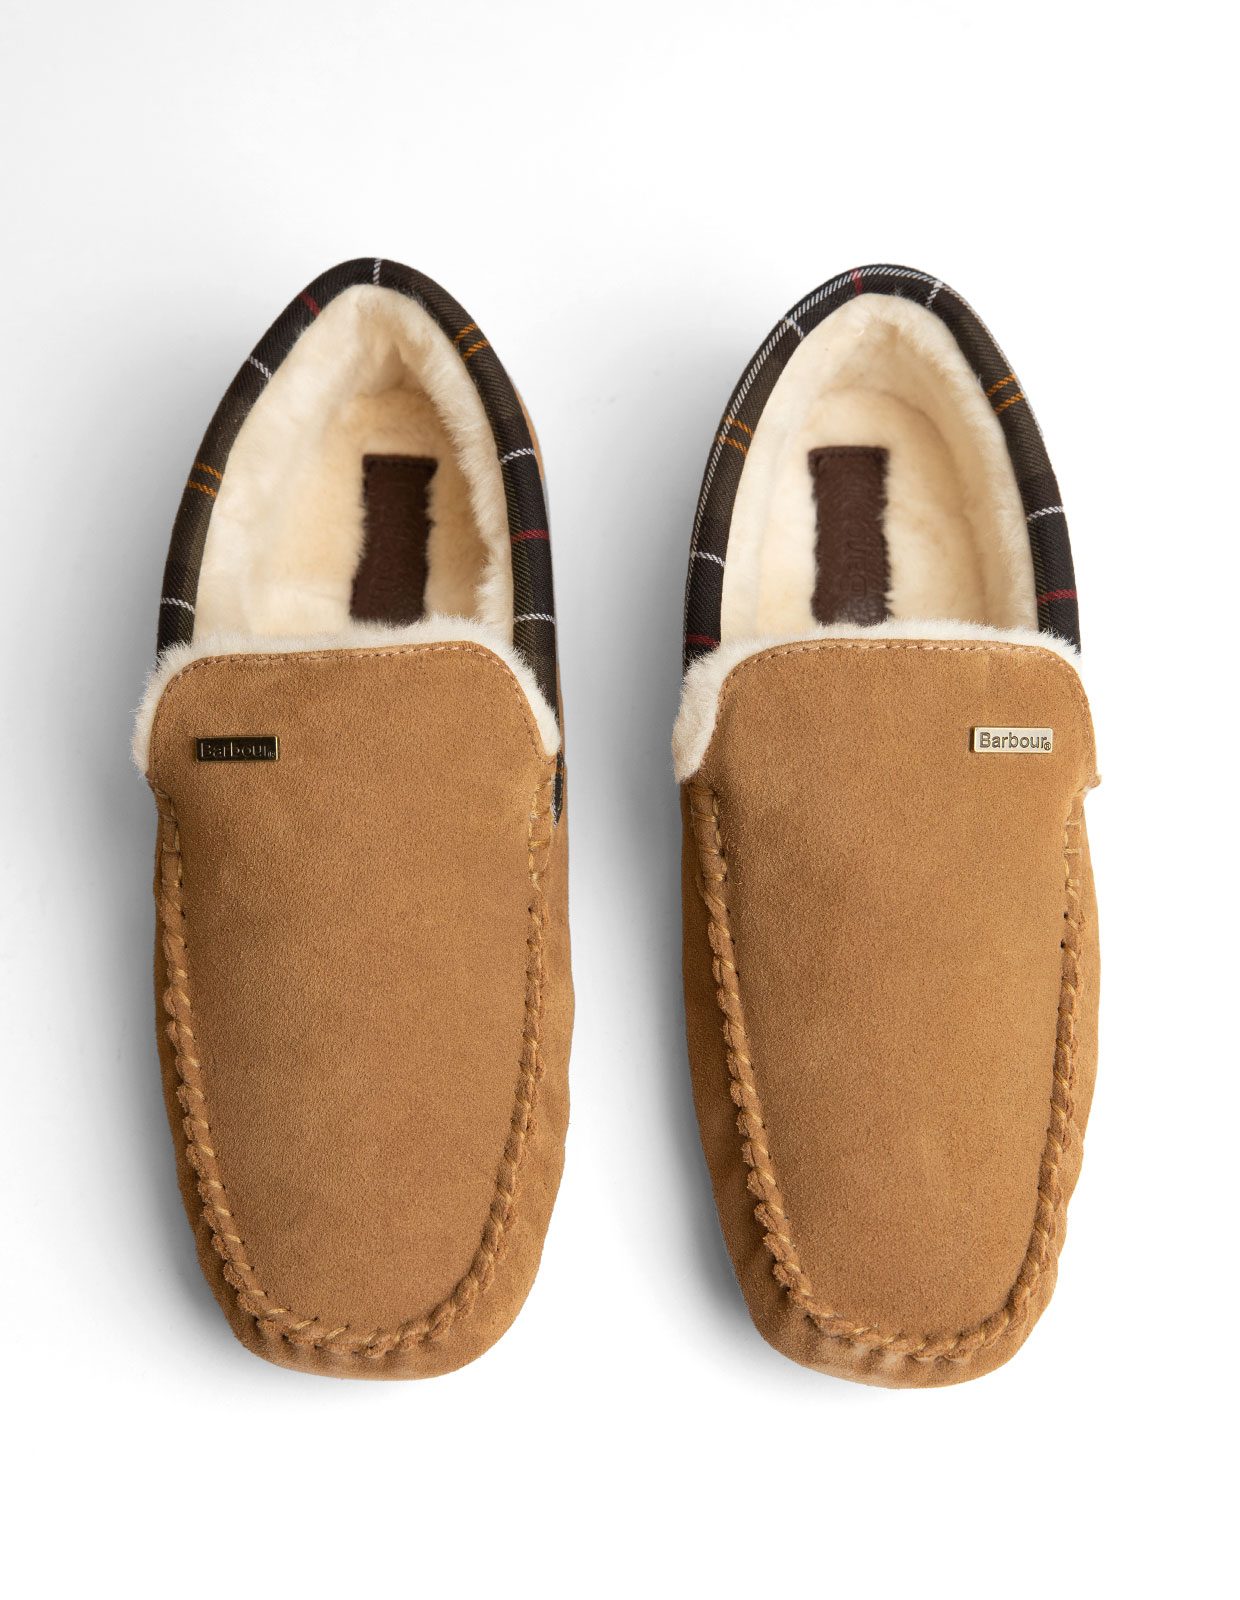 Monty Slippers Camel Suede